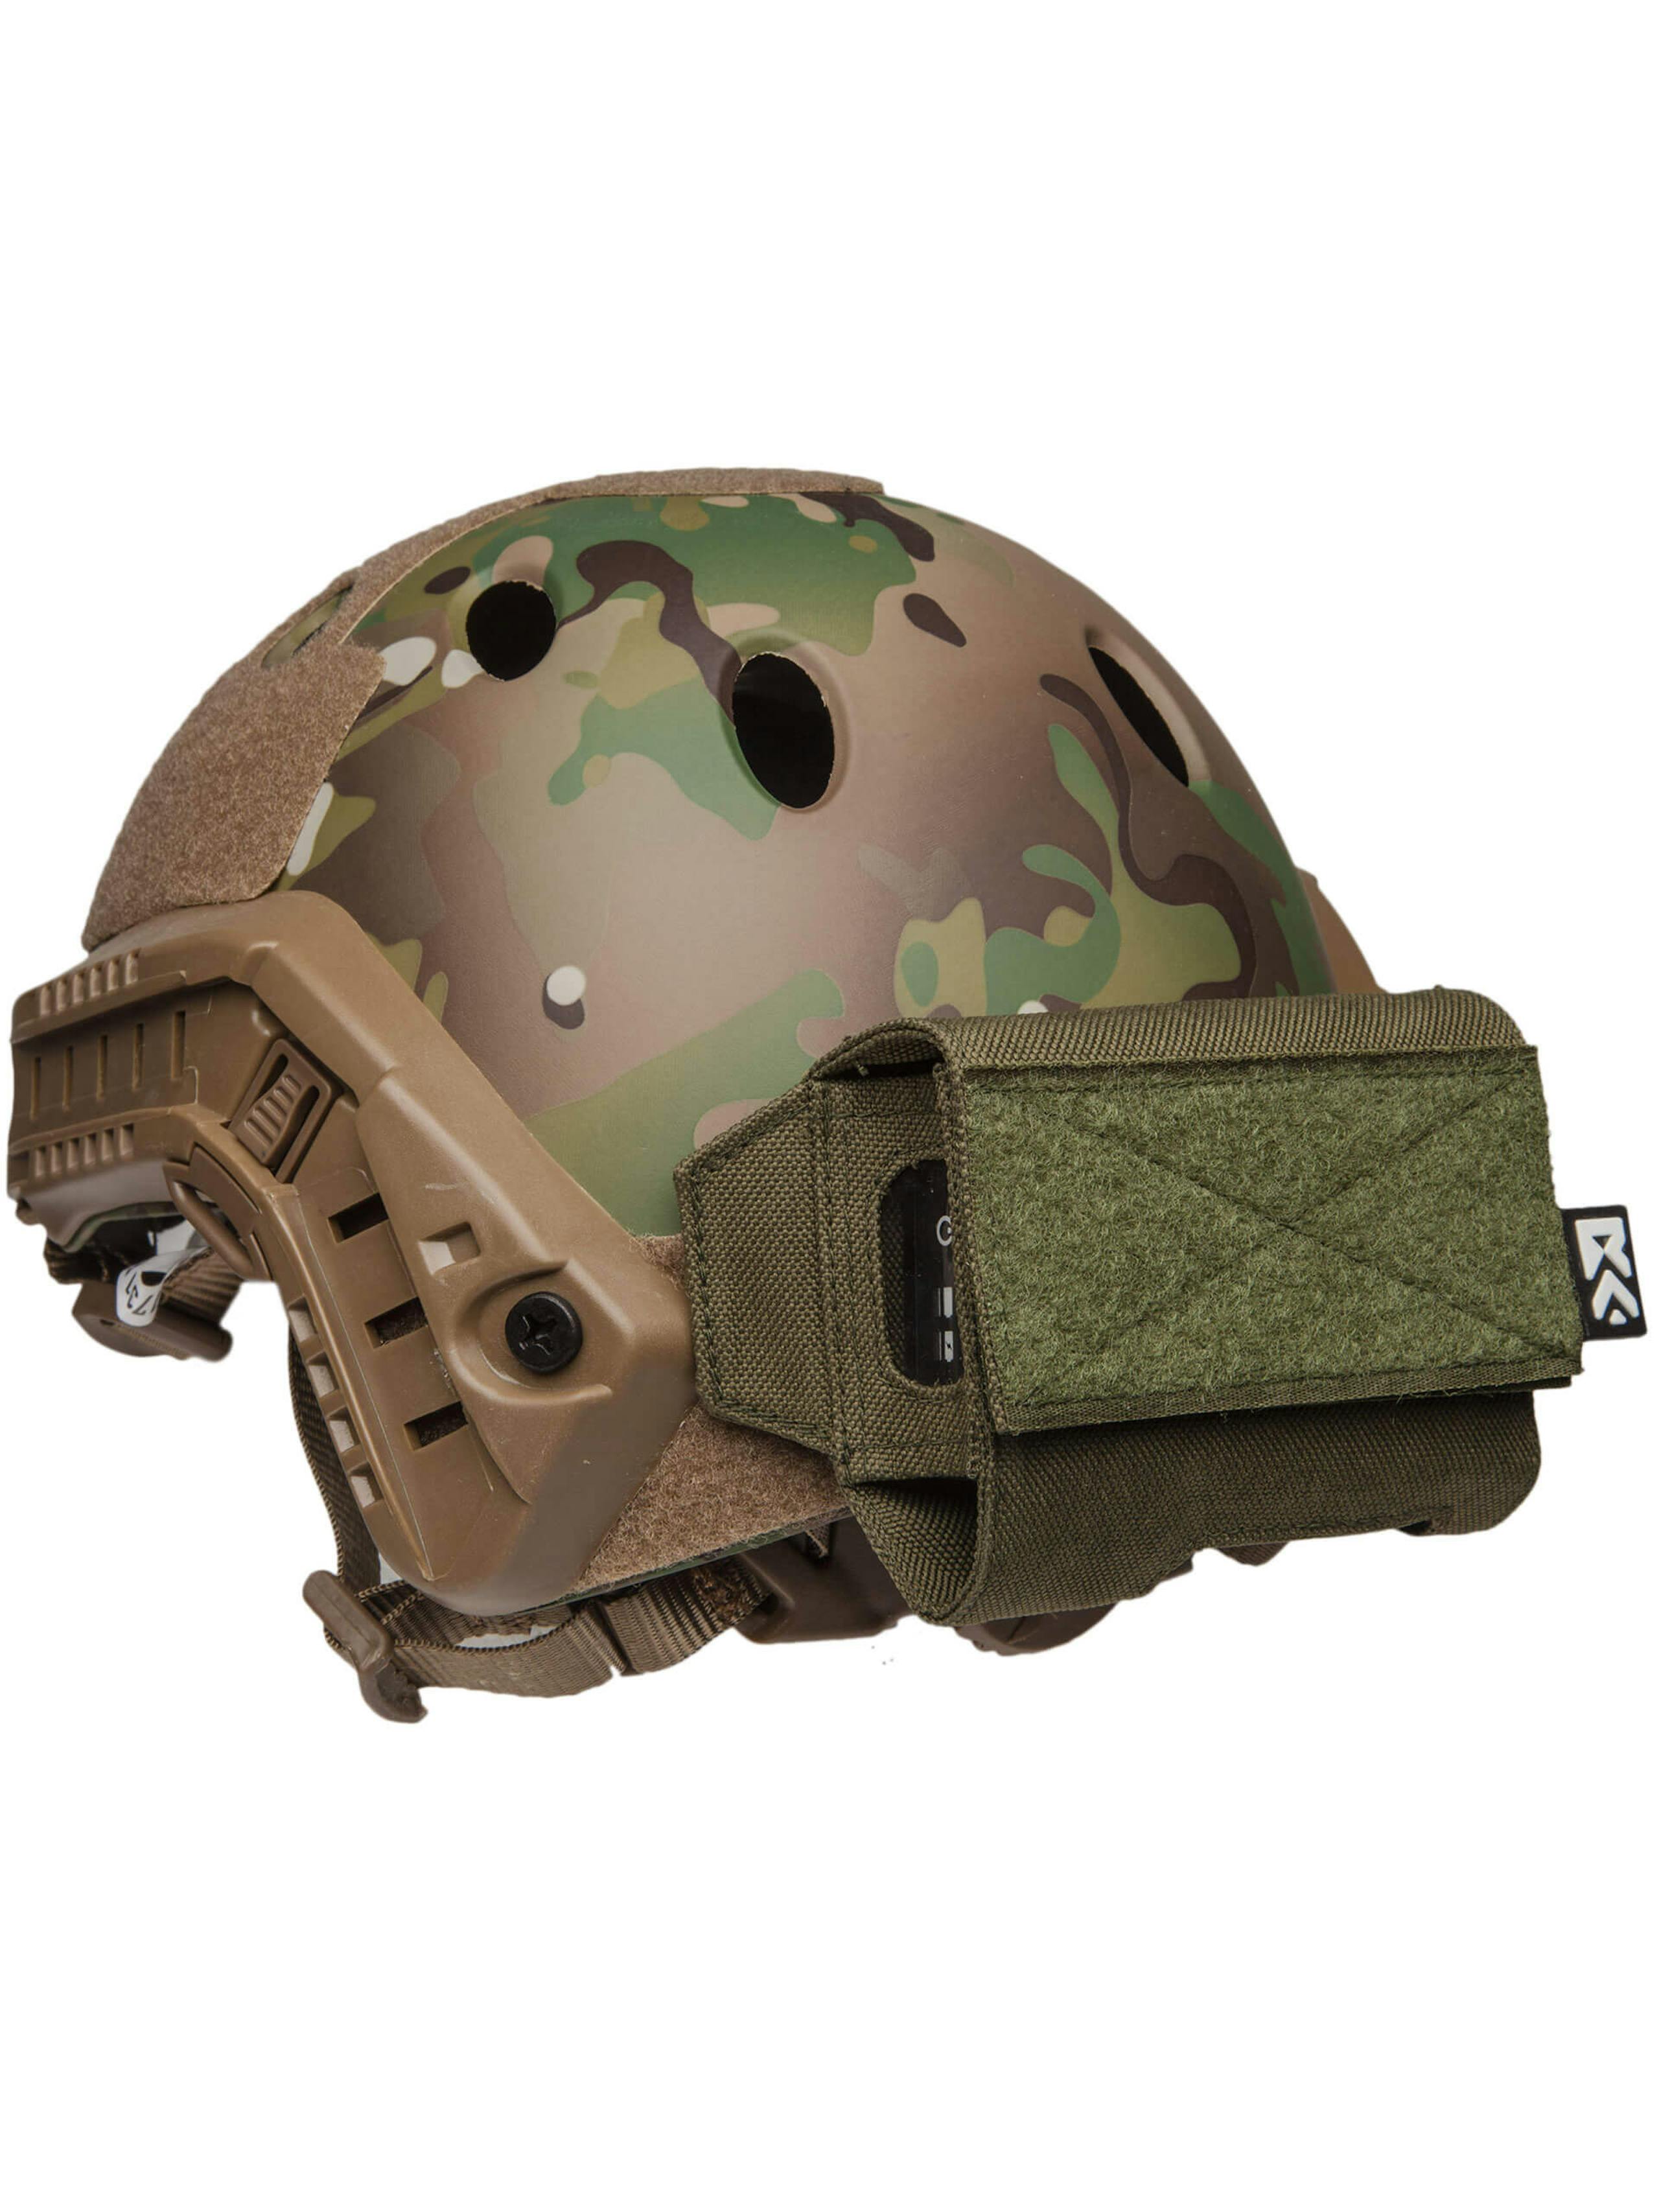 ExFog Helmet Pouch in olive mounted to a FAST Helmet